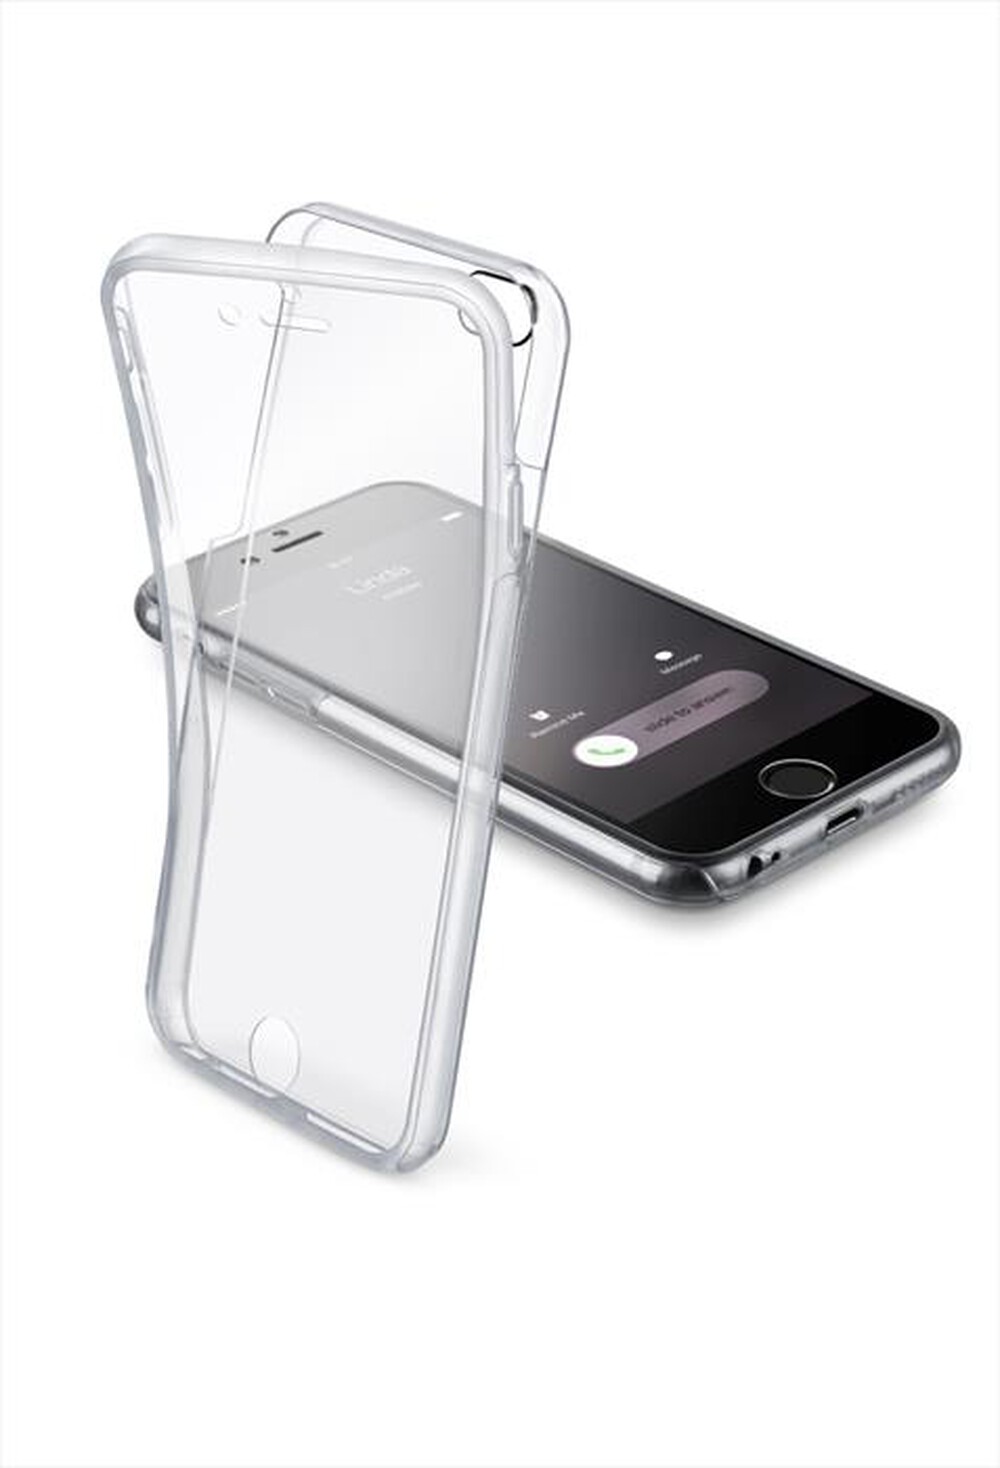 "CELLULARLINE - CLEARTOUCHIPH647T Back cover Clear Touch iPhone 6-Trasparente"